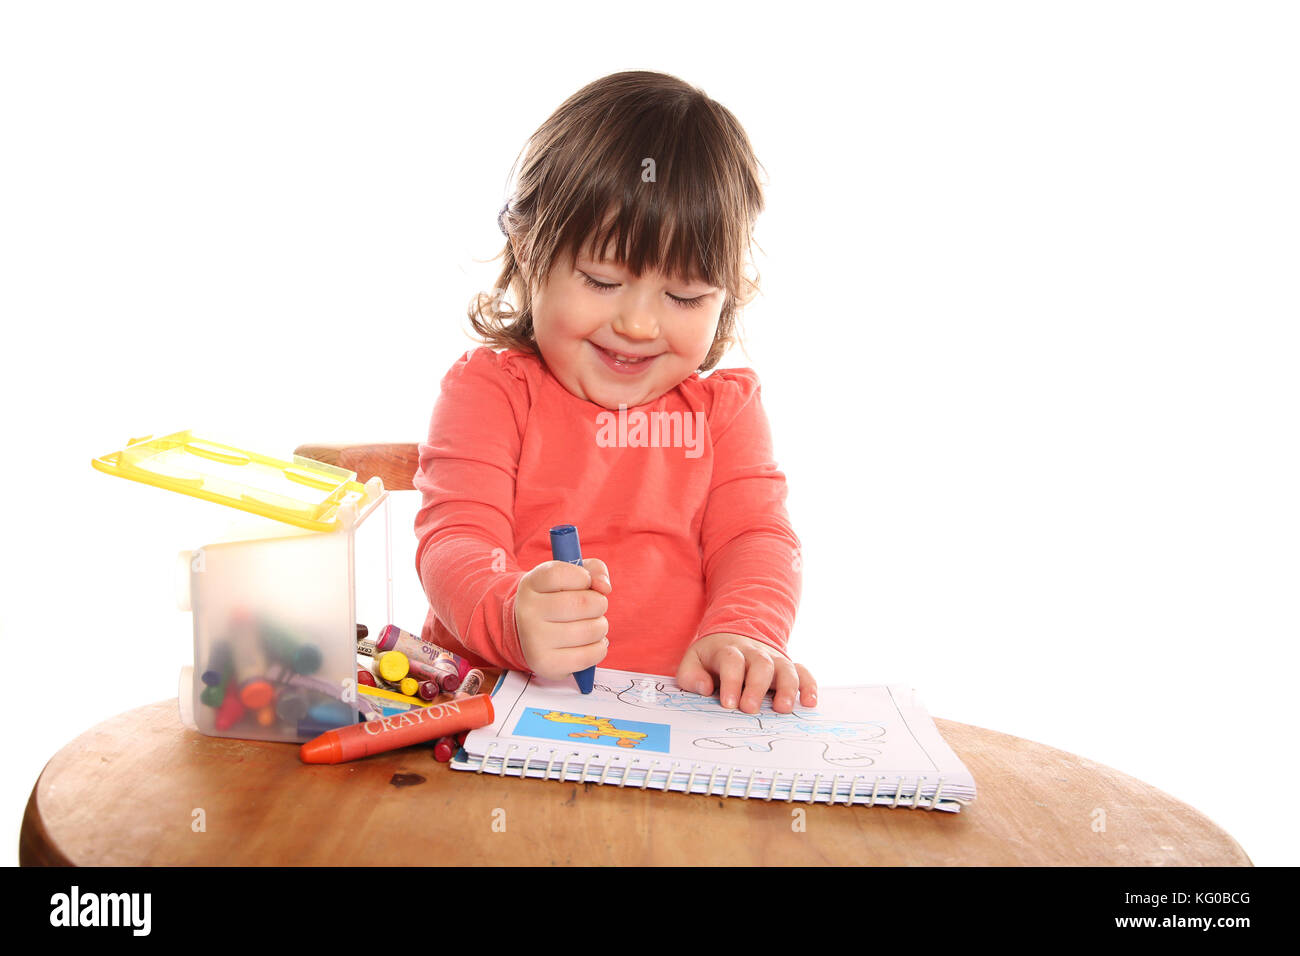 toddler girl colouring with crayons Stock Photo